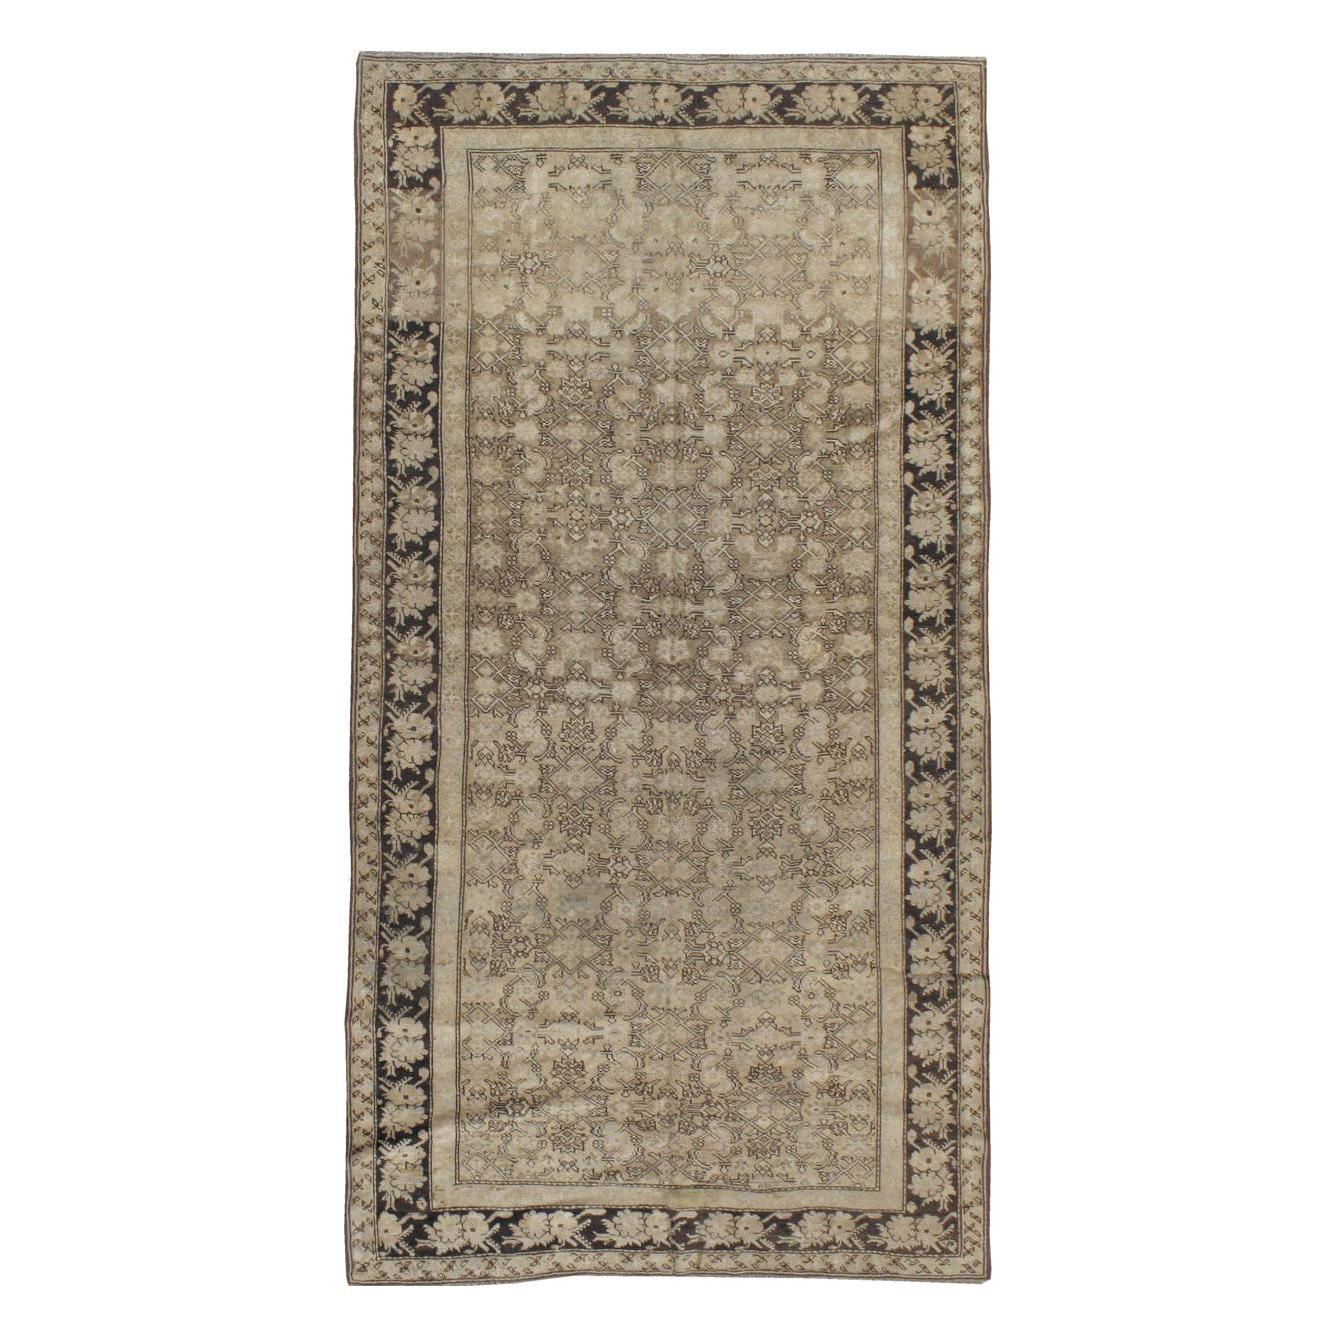 Early 20th Century Handmade Caucasian Gallery Accent Rug in Neutral Brown